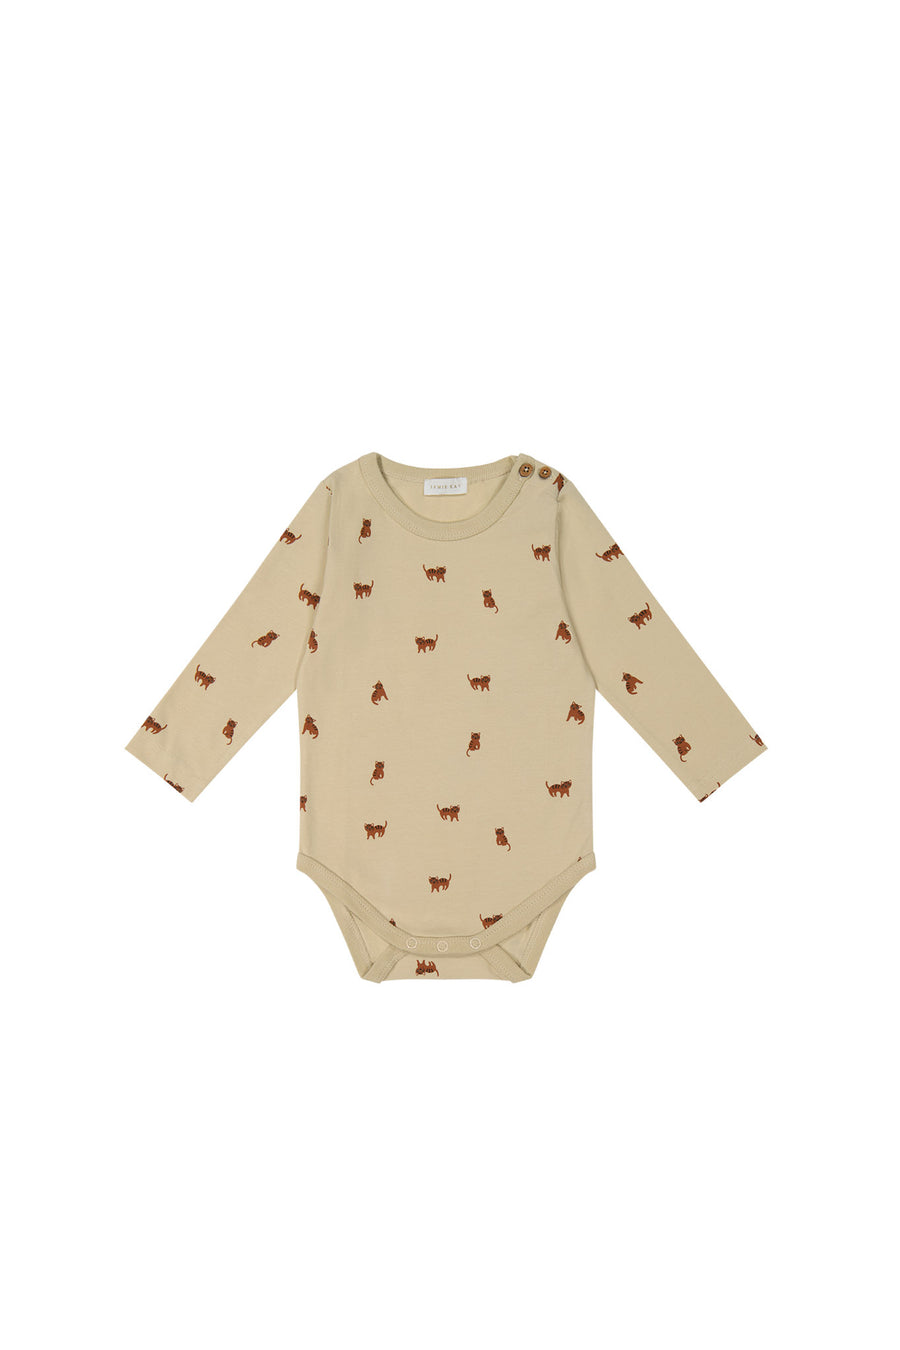 Organic Cotton Long Sleeve Bodysuit - Tommy Tigers Childrens Bodysuit from Jamie Kay NZ